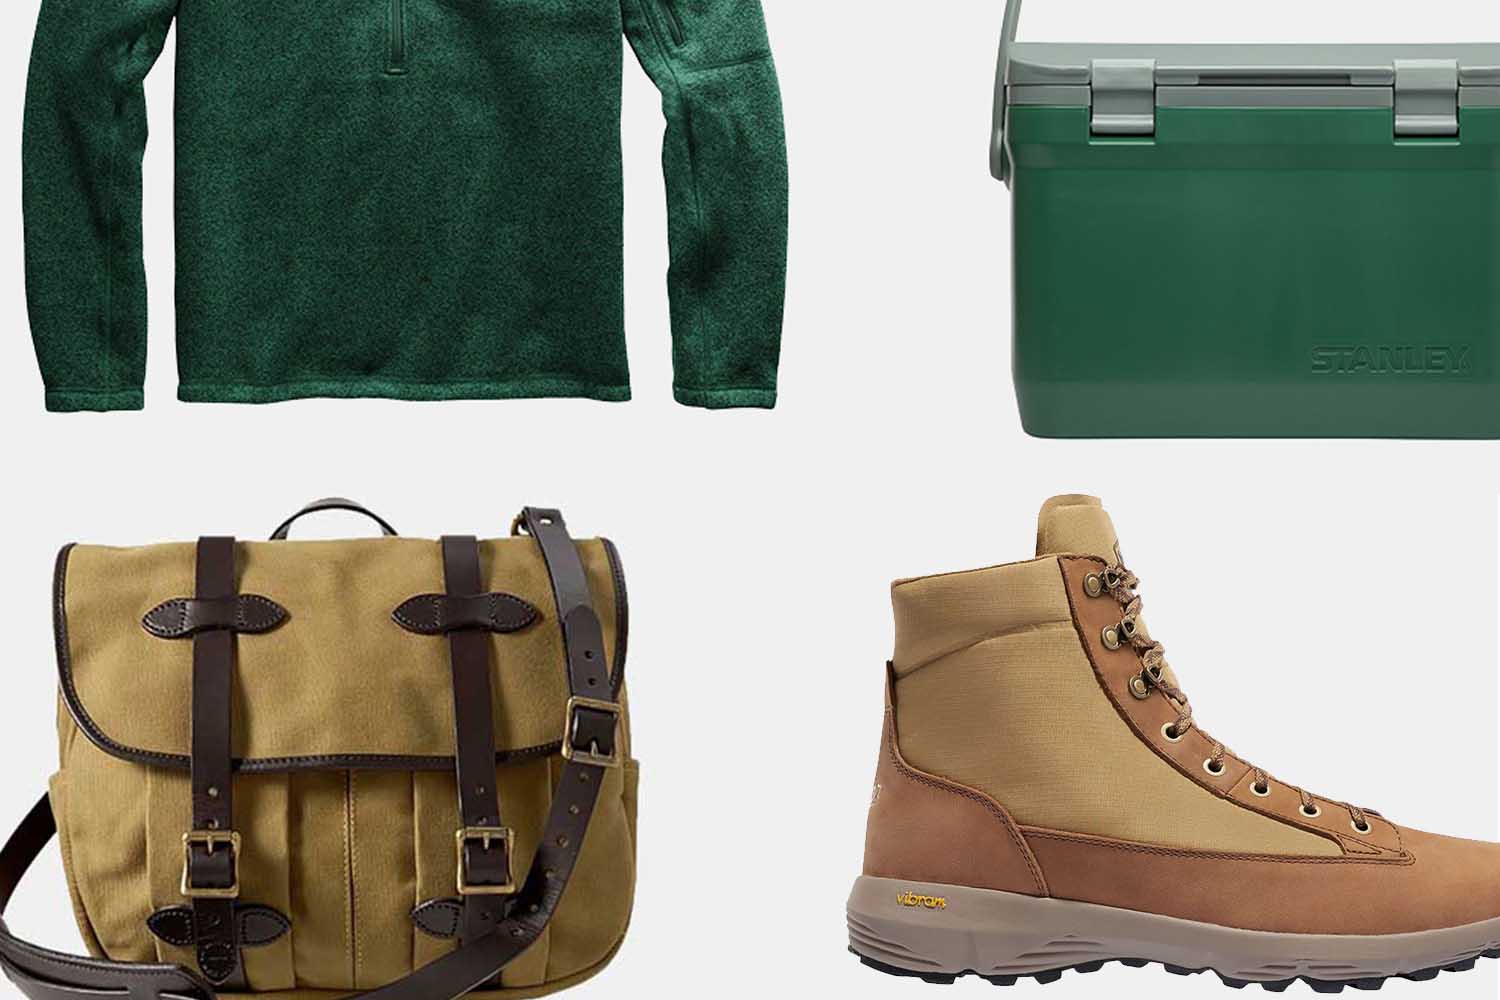 There Are Two Very Good Sales Happening at Backcountry Right Now